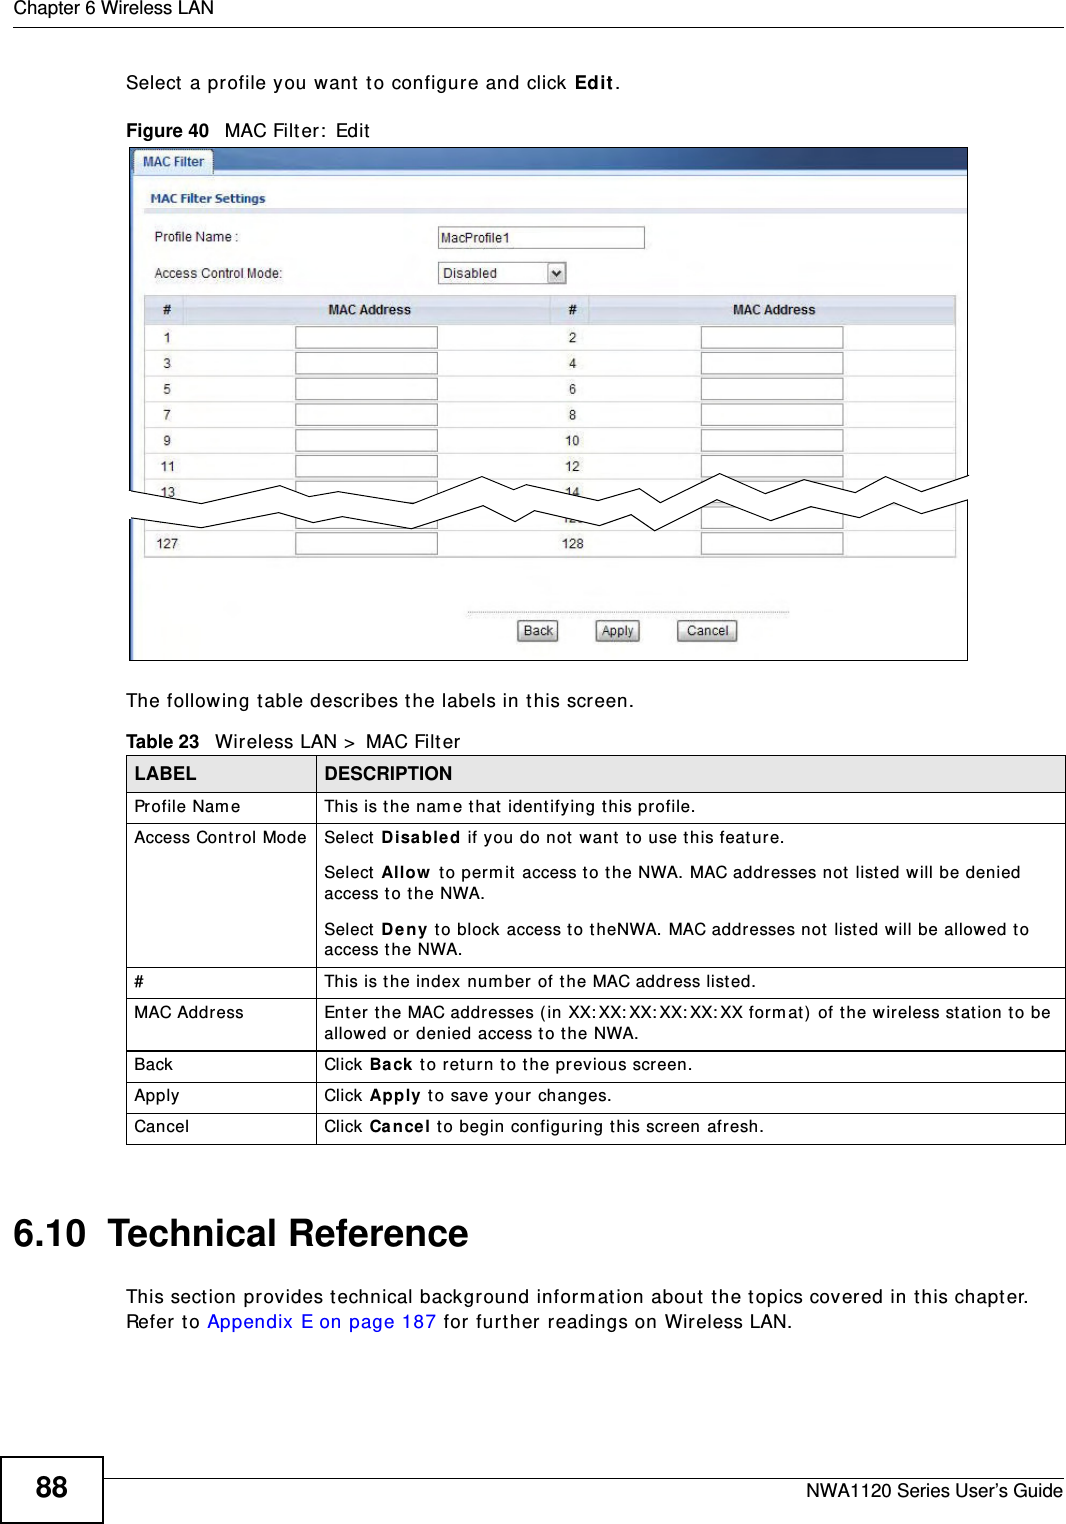 Chapter 6 Wireless LANNWA1120 Series User’s Guide88Select a profile you want to configure and click Edit. Figure 40   MAC Filter: EditThe following table describes the labels in this screen.6.10  Technical ReferenceThis section provides technical background information about the topics covered in this chapter. Refer to Appendix E on page 187 for further readings on Wireless LAN.Table 23   Wireless LAN &gt; MAC FilterLABEL DESCRIPTIONProfile Name This is the name that identifying this profile.Access Control Mode Select Disabled if you do not want to use this feature.Select Allow to permit access to the NWA. MAC addresses not listed will be denied access to the NWA.Select Deny to block access to theNWA. MAC addresses not listed will be allowed to access the NWA.#This is the index number of the MAC address listed.MAC Address Enter the MAC addresses (in XX:XX:XX:XX:XX:XX format) of the wireless station to be allowed or denied access to the NWA.Back Click Back to return to the previous screen.Apply Click Apply to save your changes.Cancel Click Cancel to begin configuring this screen afresh.